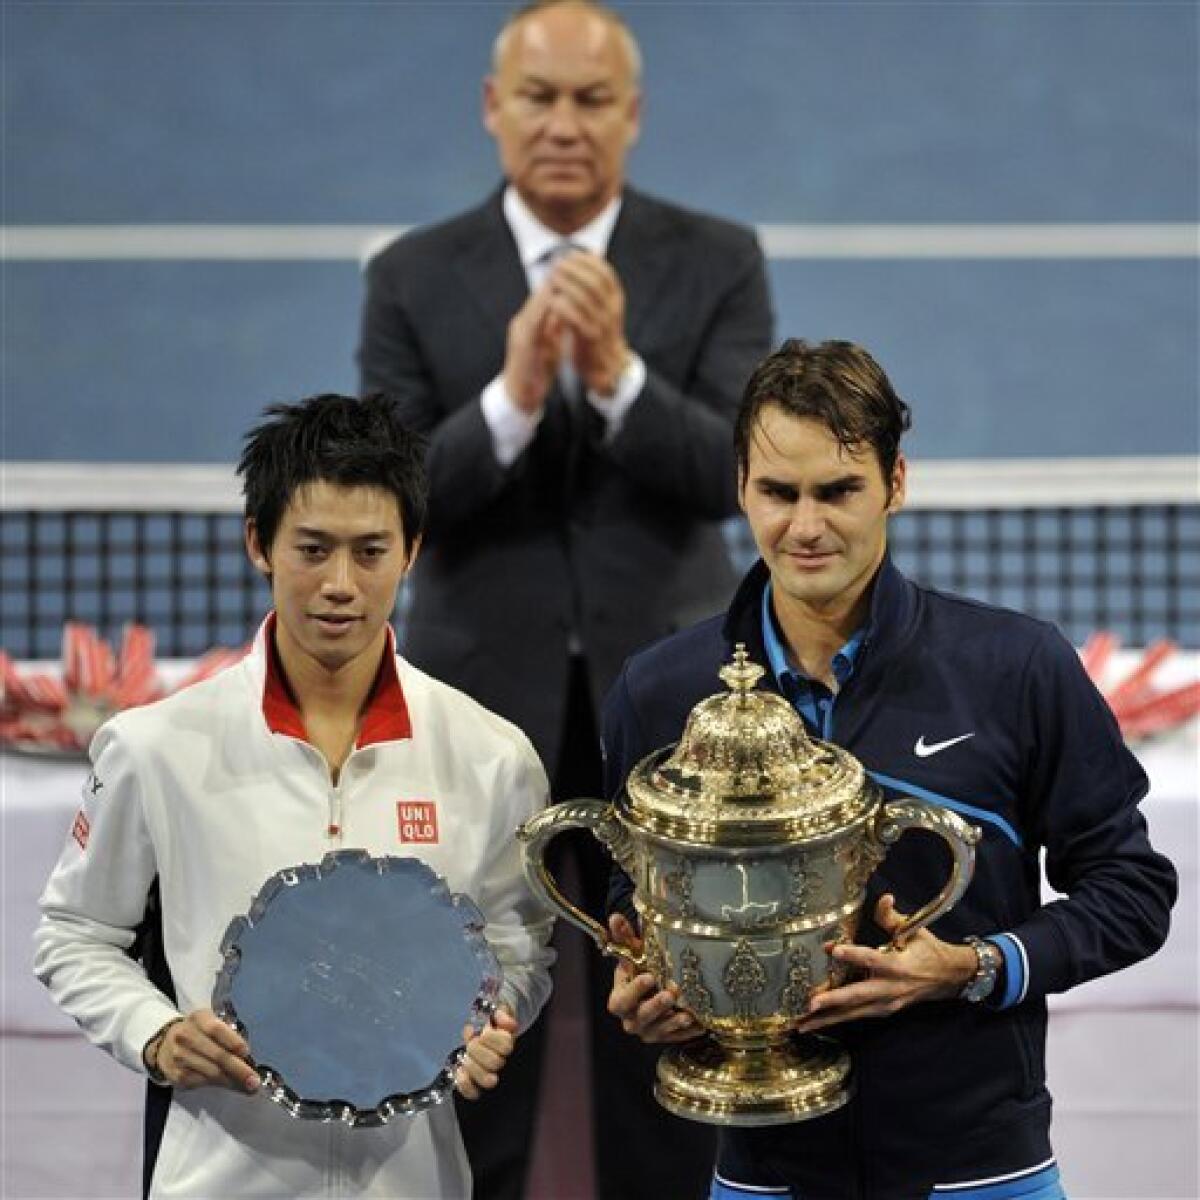 Federer wins at Basel for first title in 10 months - The San Diego 